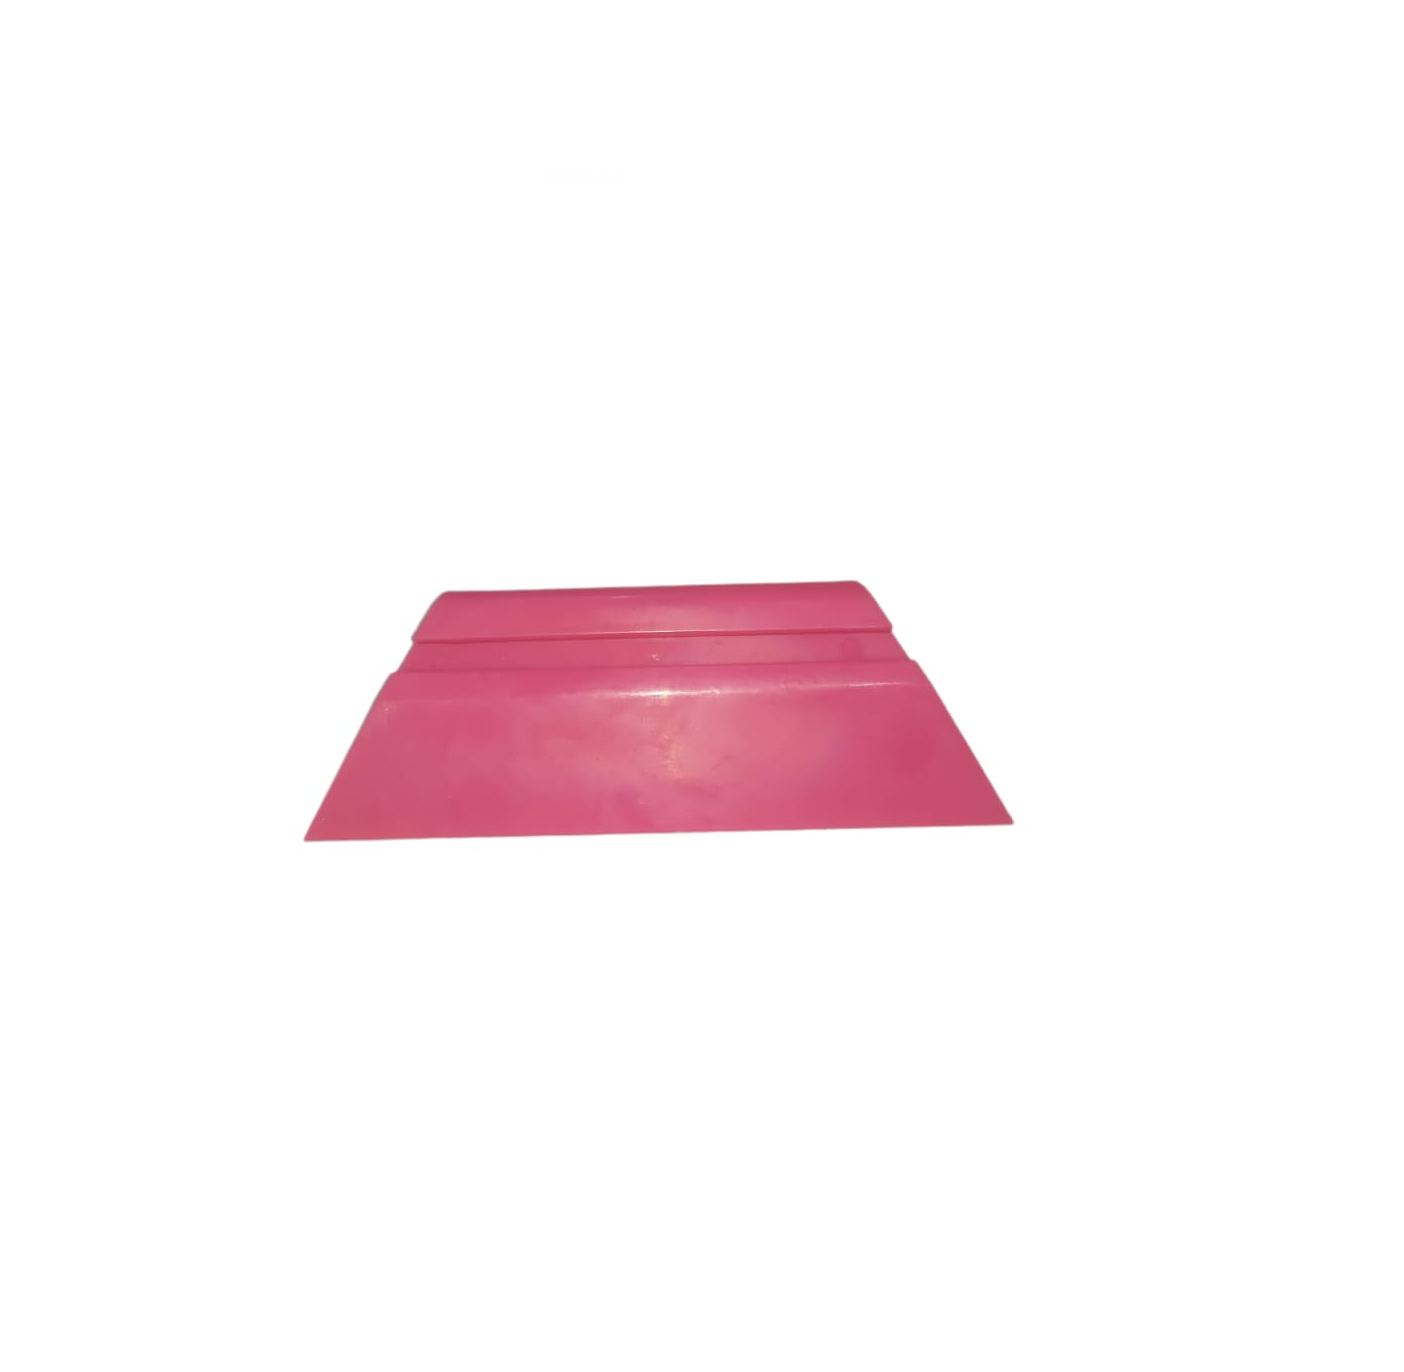 SQUEEGEE TUBO PINK 14cm